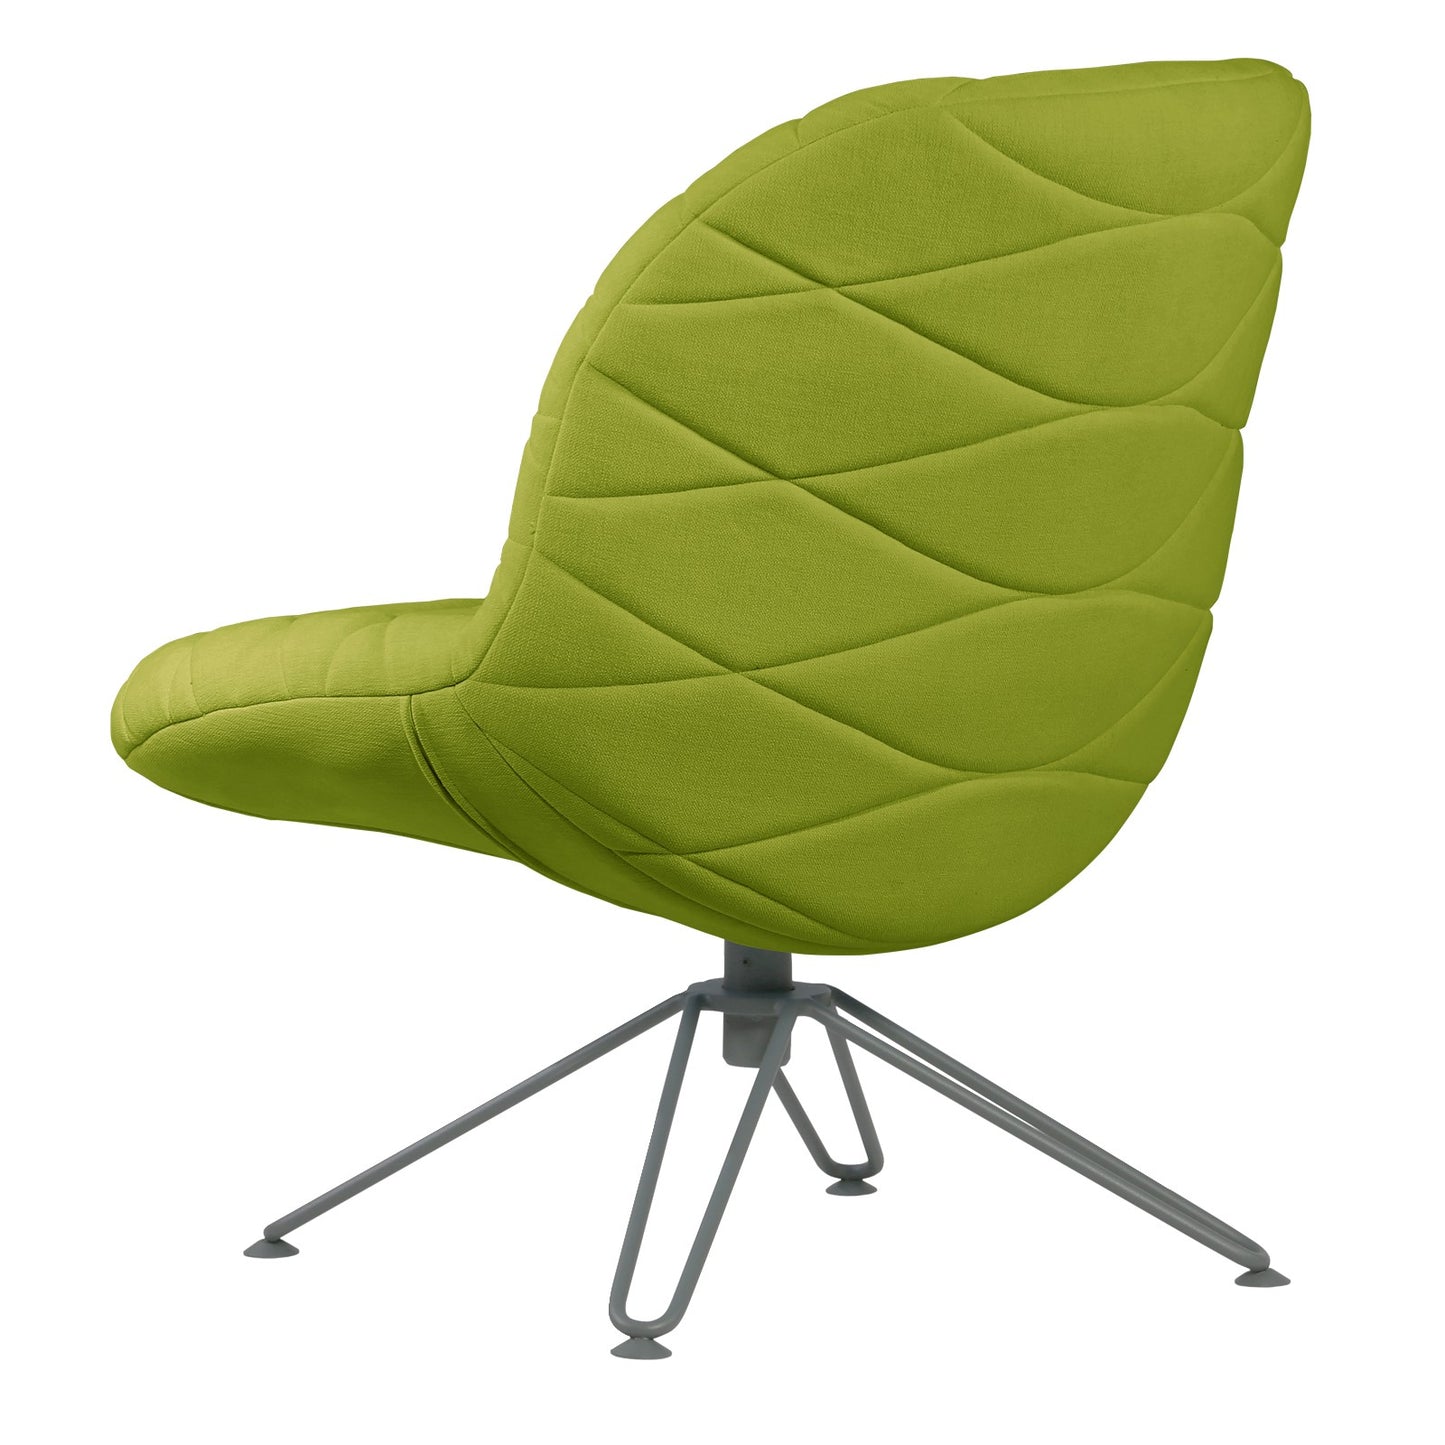 Lounge chair Mannequin Lounge 03 - Green